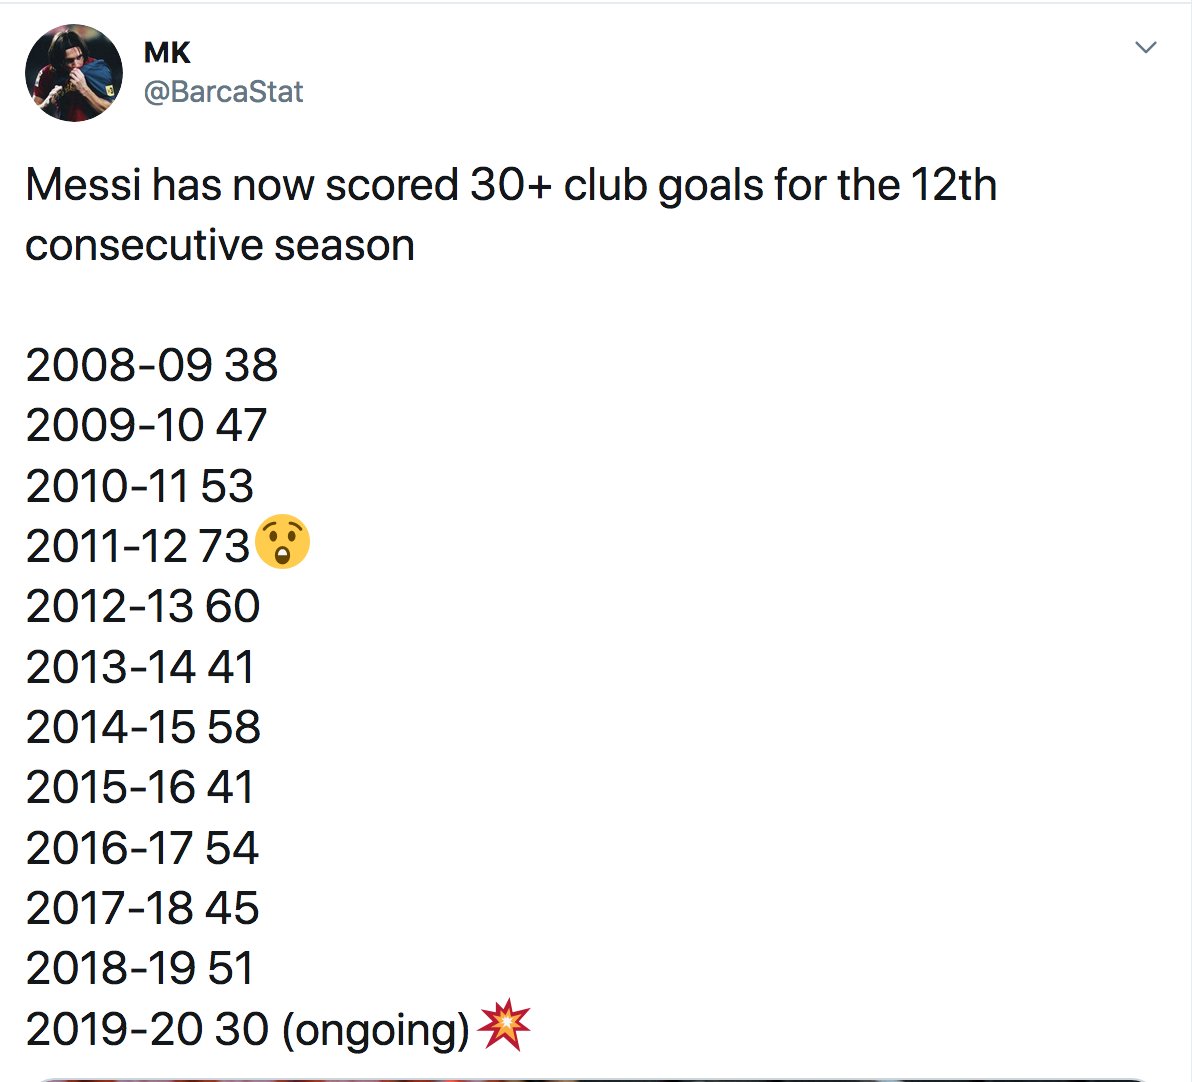 - Most league goals in a season (50) in Europe's top 5 leagues- Most consecutive league games scored in (21)- Most assists in Europe’s top 5 leagues (season)- Most seasons with 40+ goals (10)- Only player to score in 7 different official competitions in one calendar year2/3